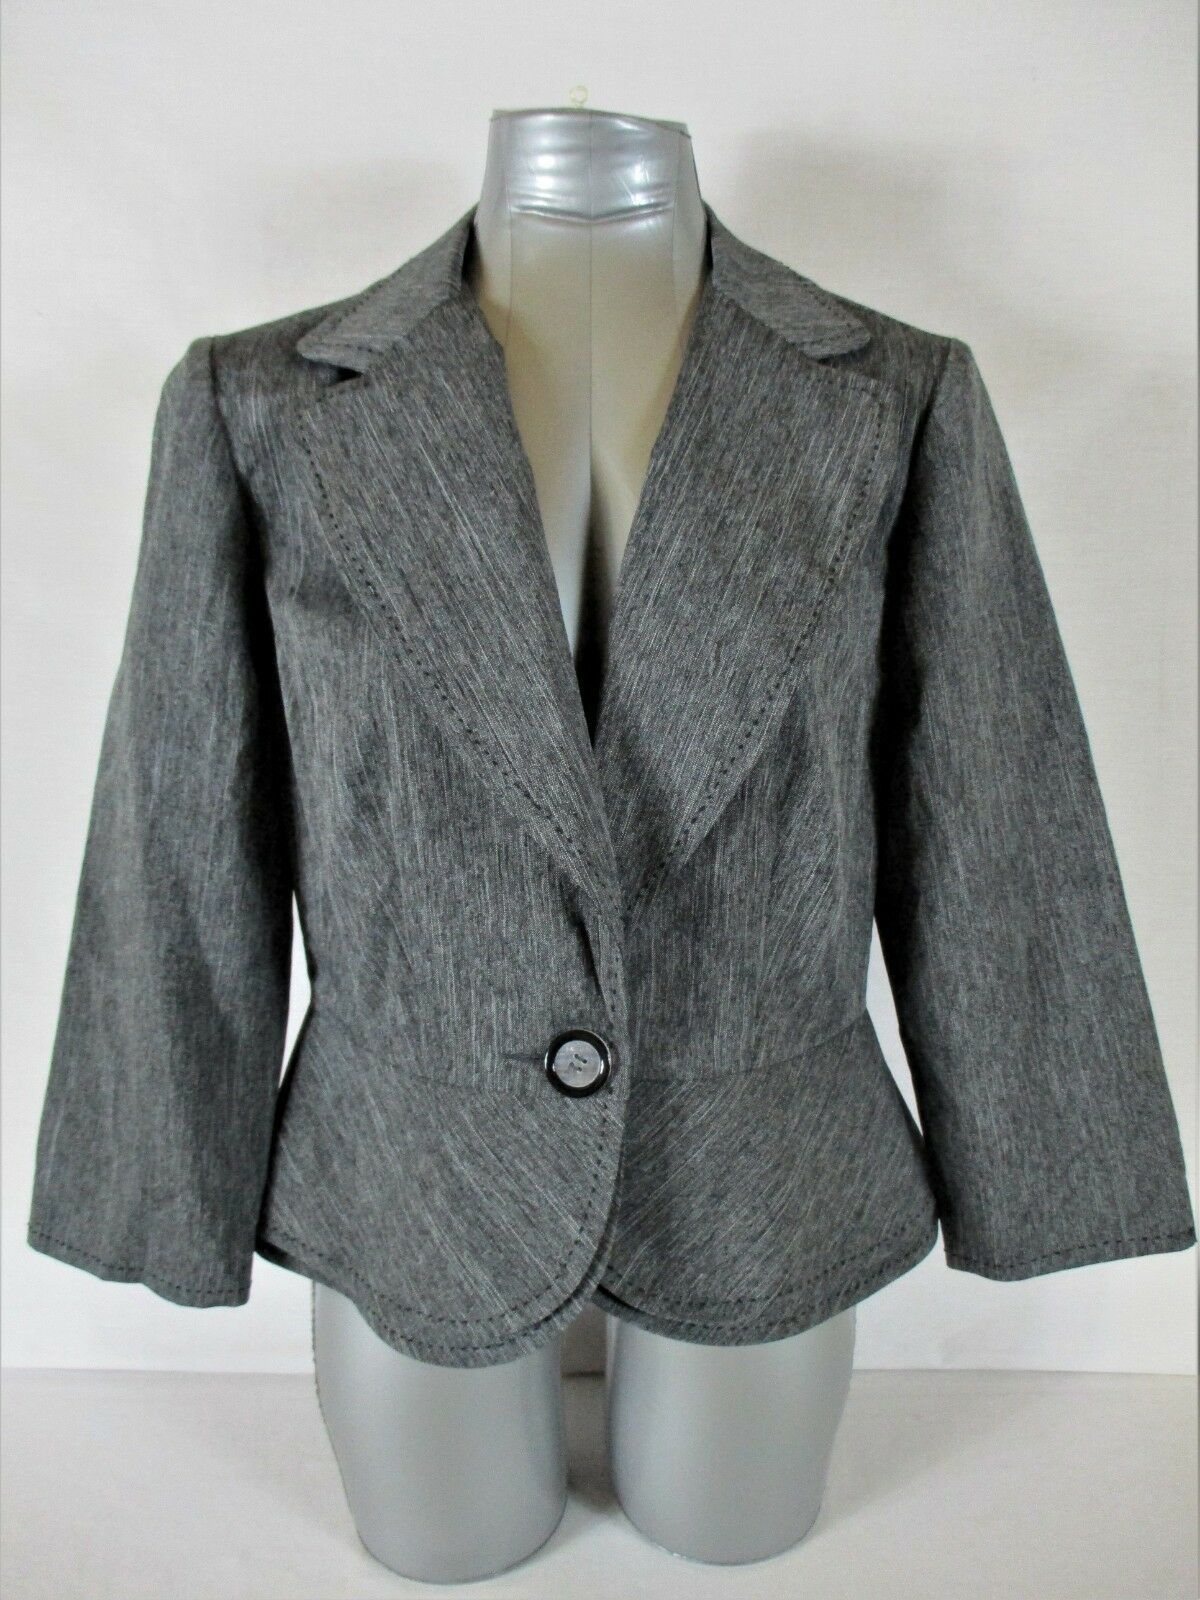 Primary image for SWEET SUIT womens Sz 12 L/S gray ONE BUTTON jacket (A4)